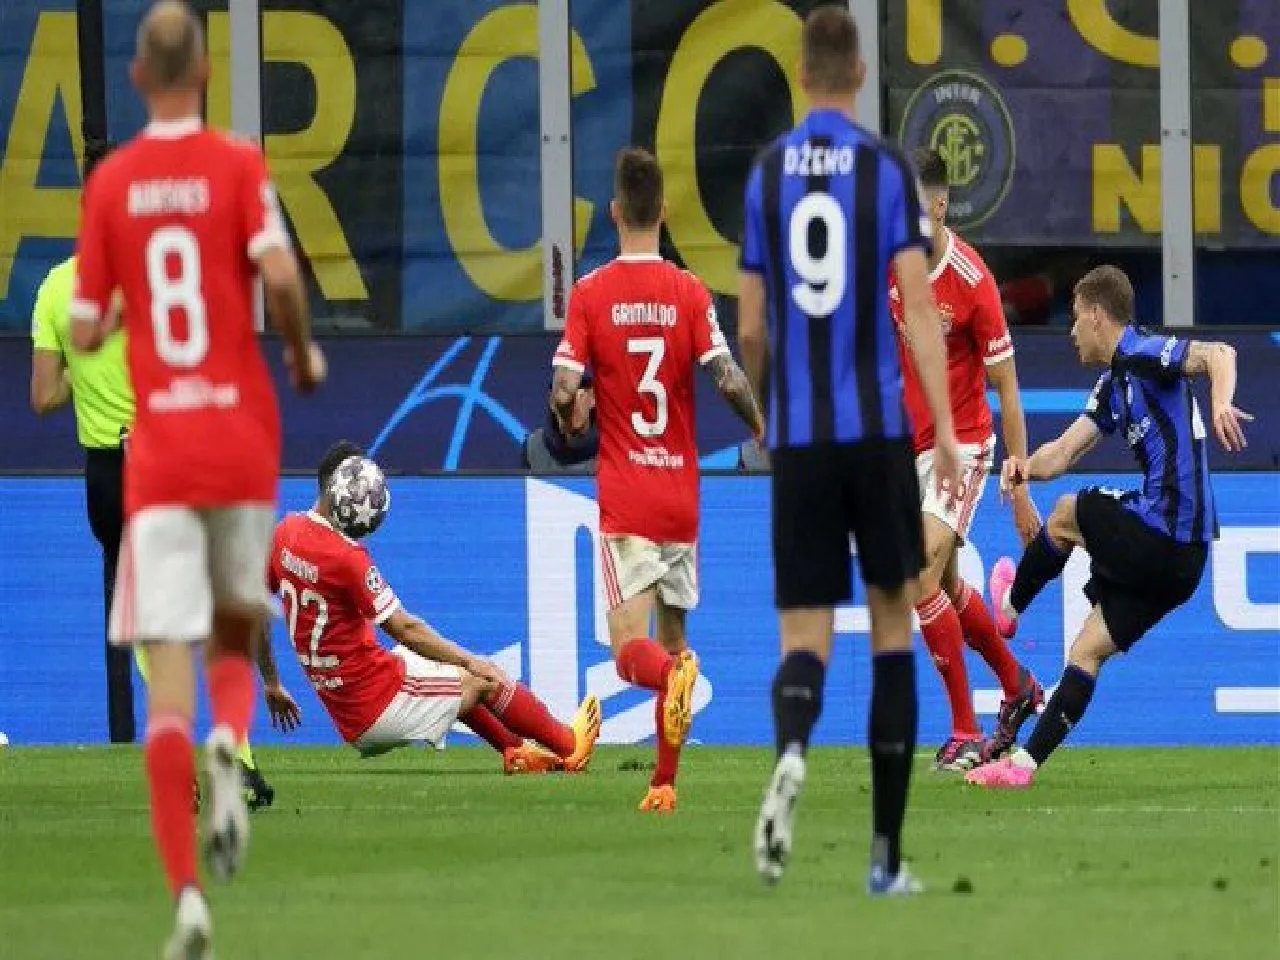 Inter vs Benfica: A tense and exciting match